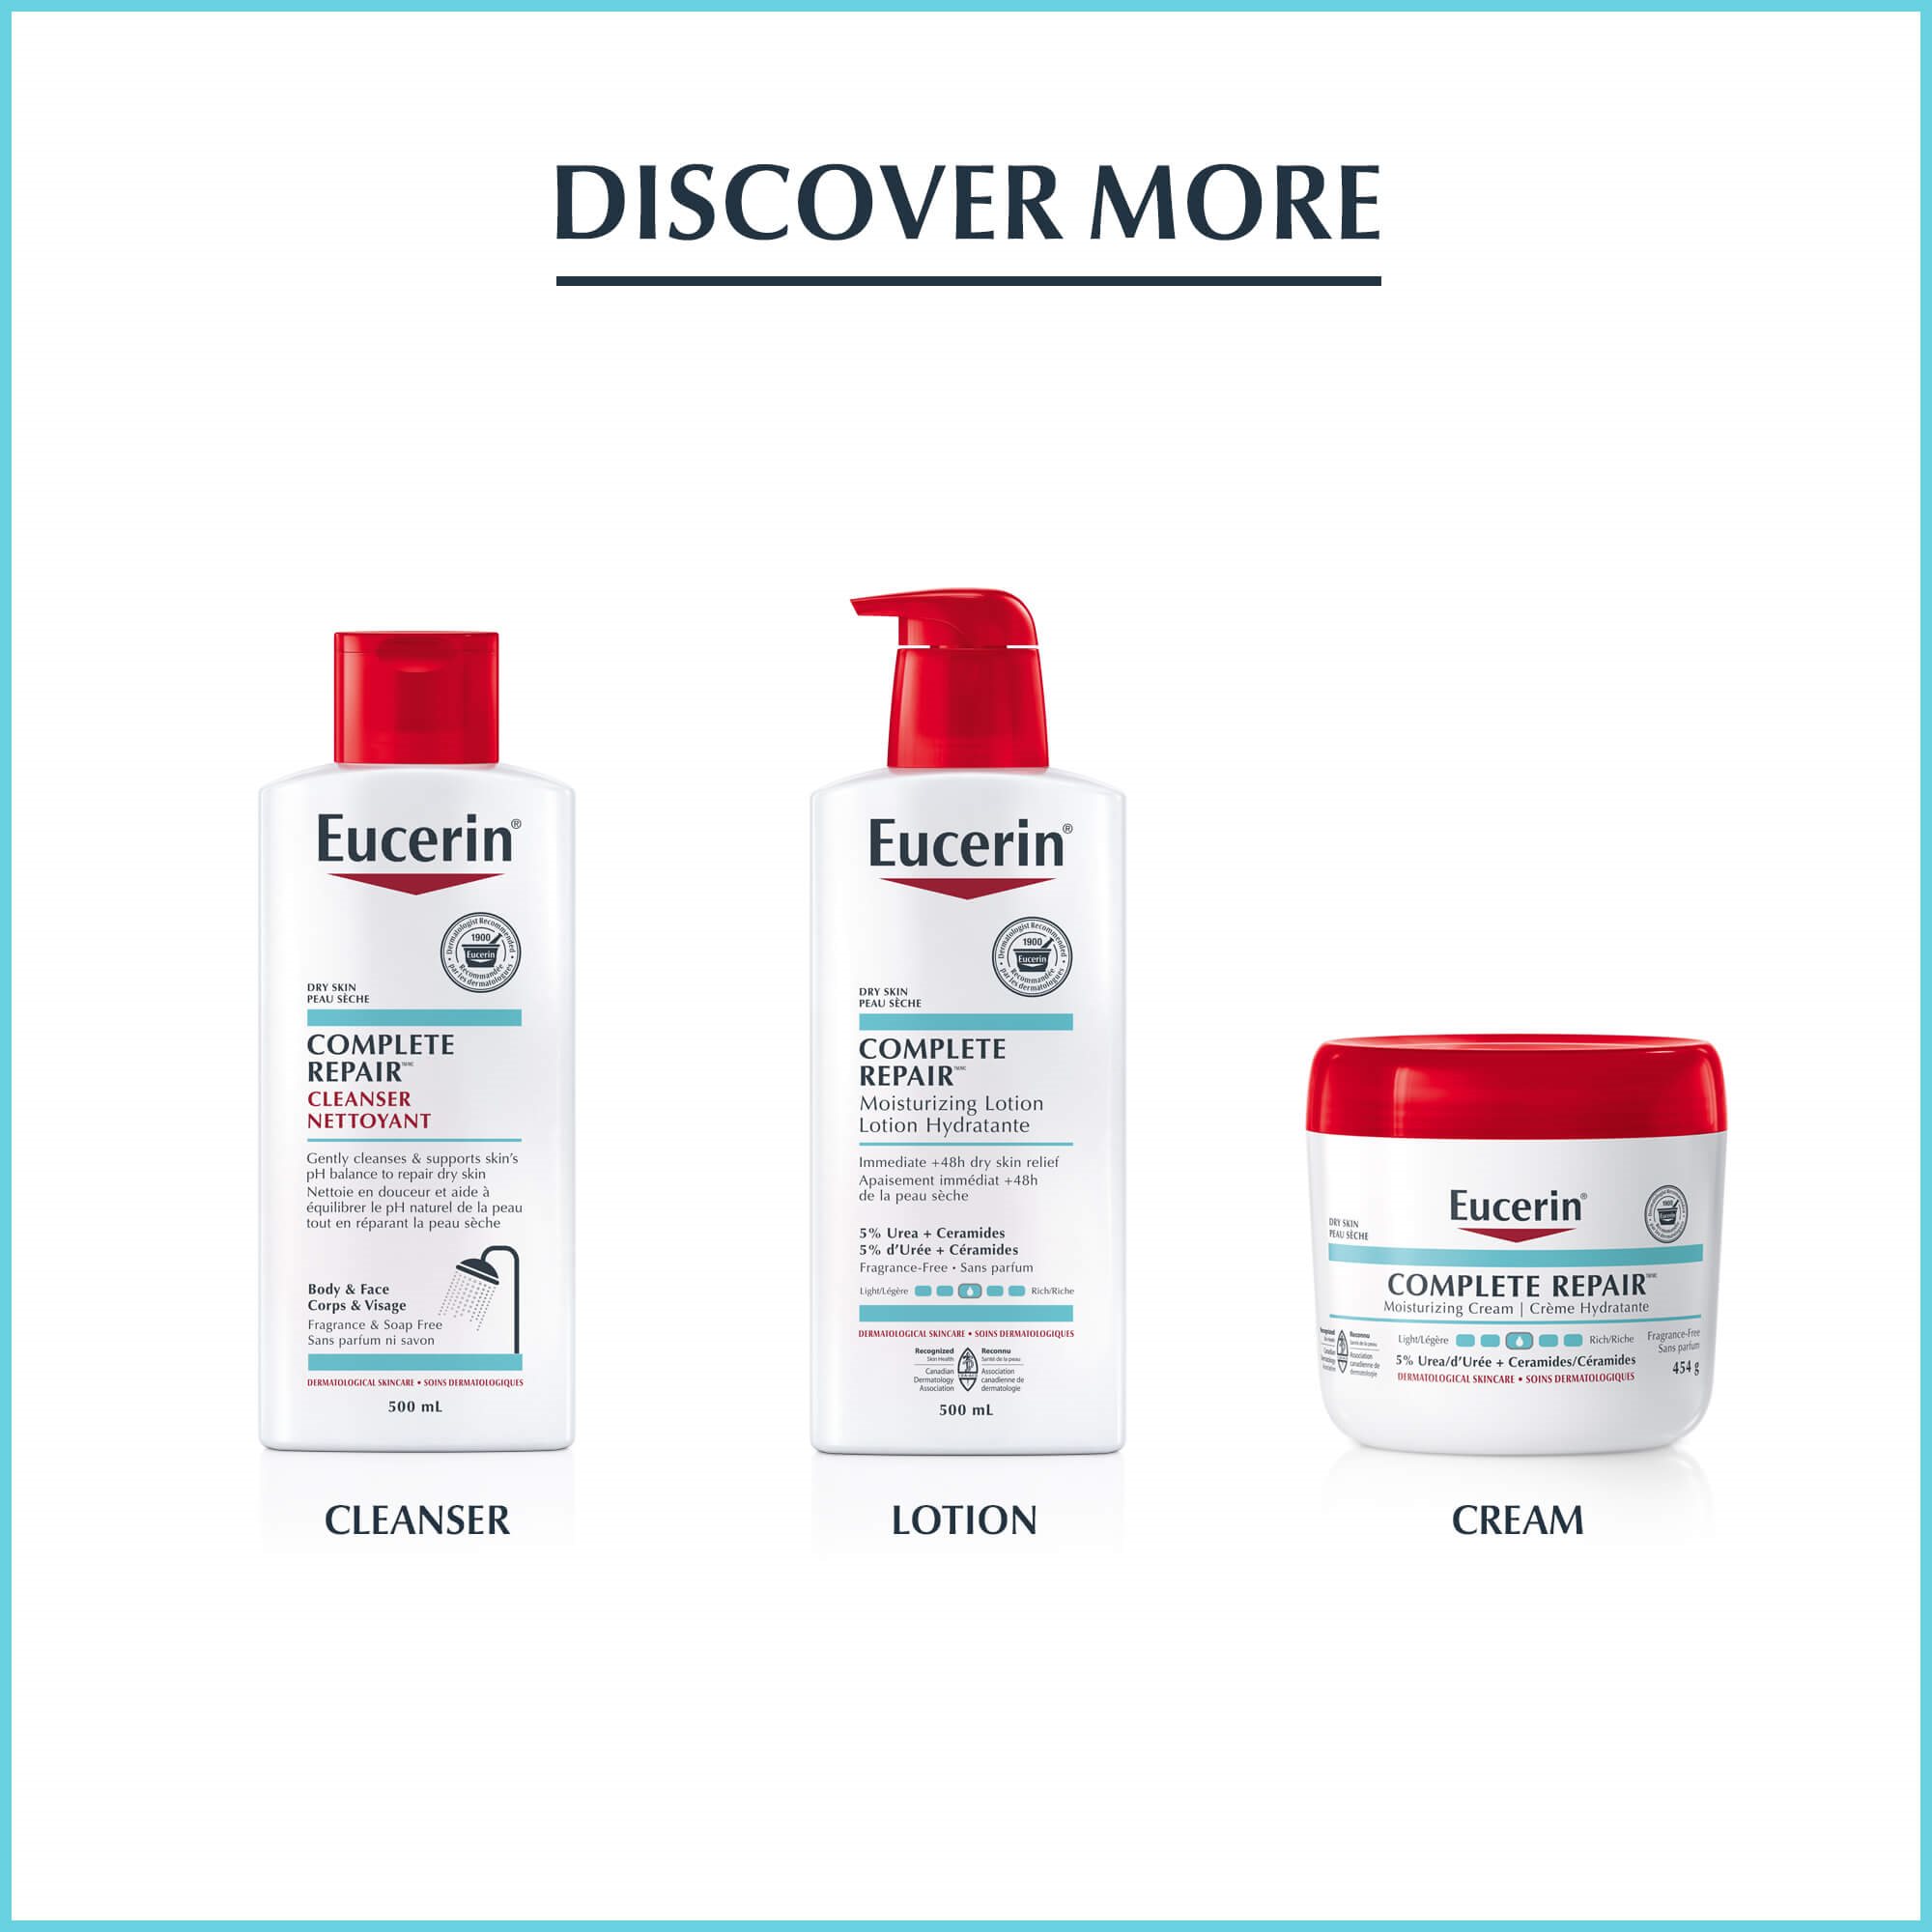 Image of the Eucerin cleanser, lotion and cream from the Complete Repair line.